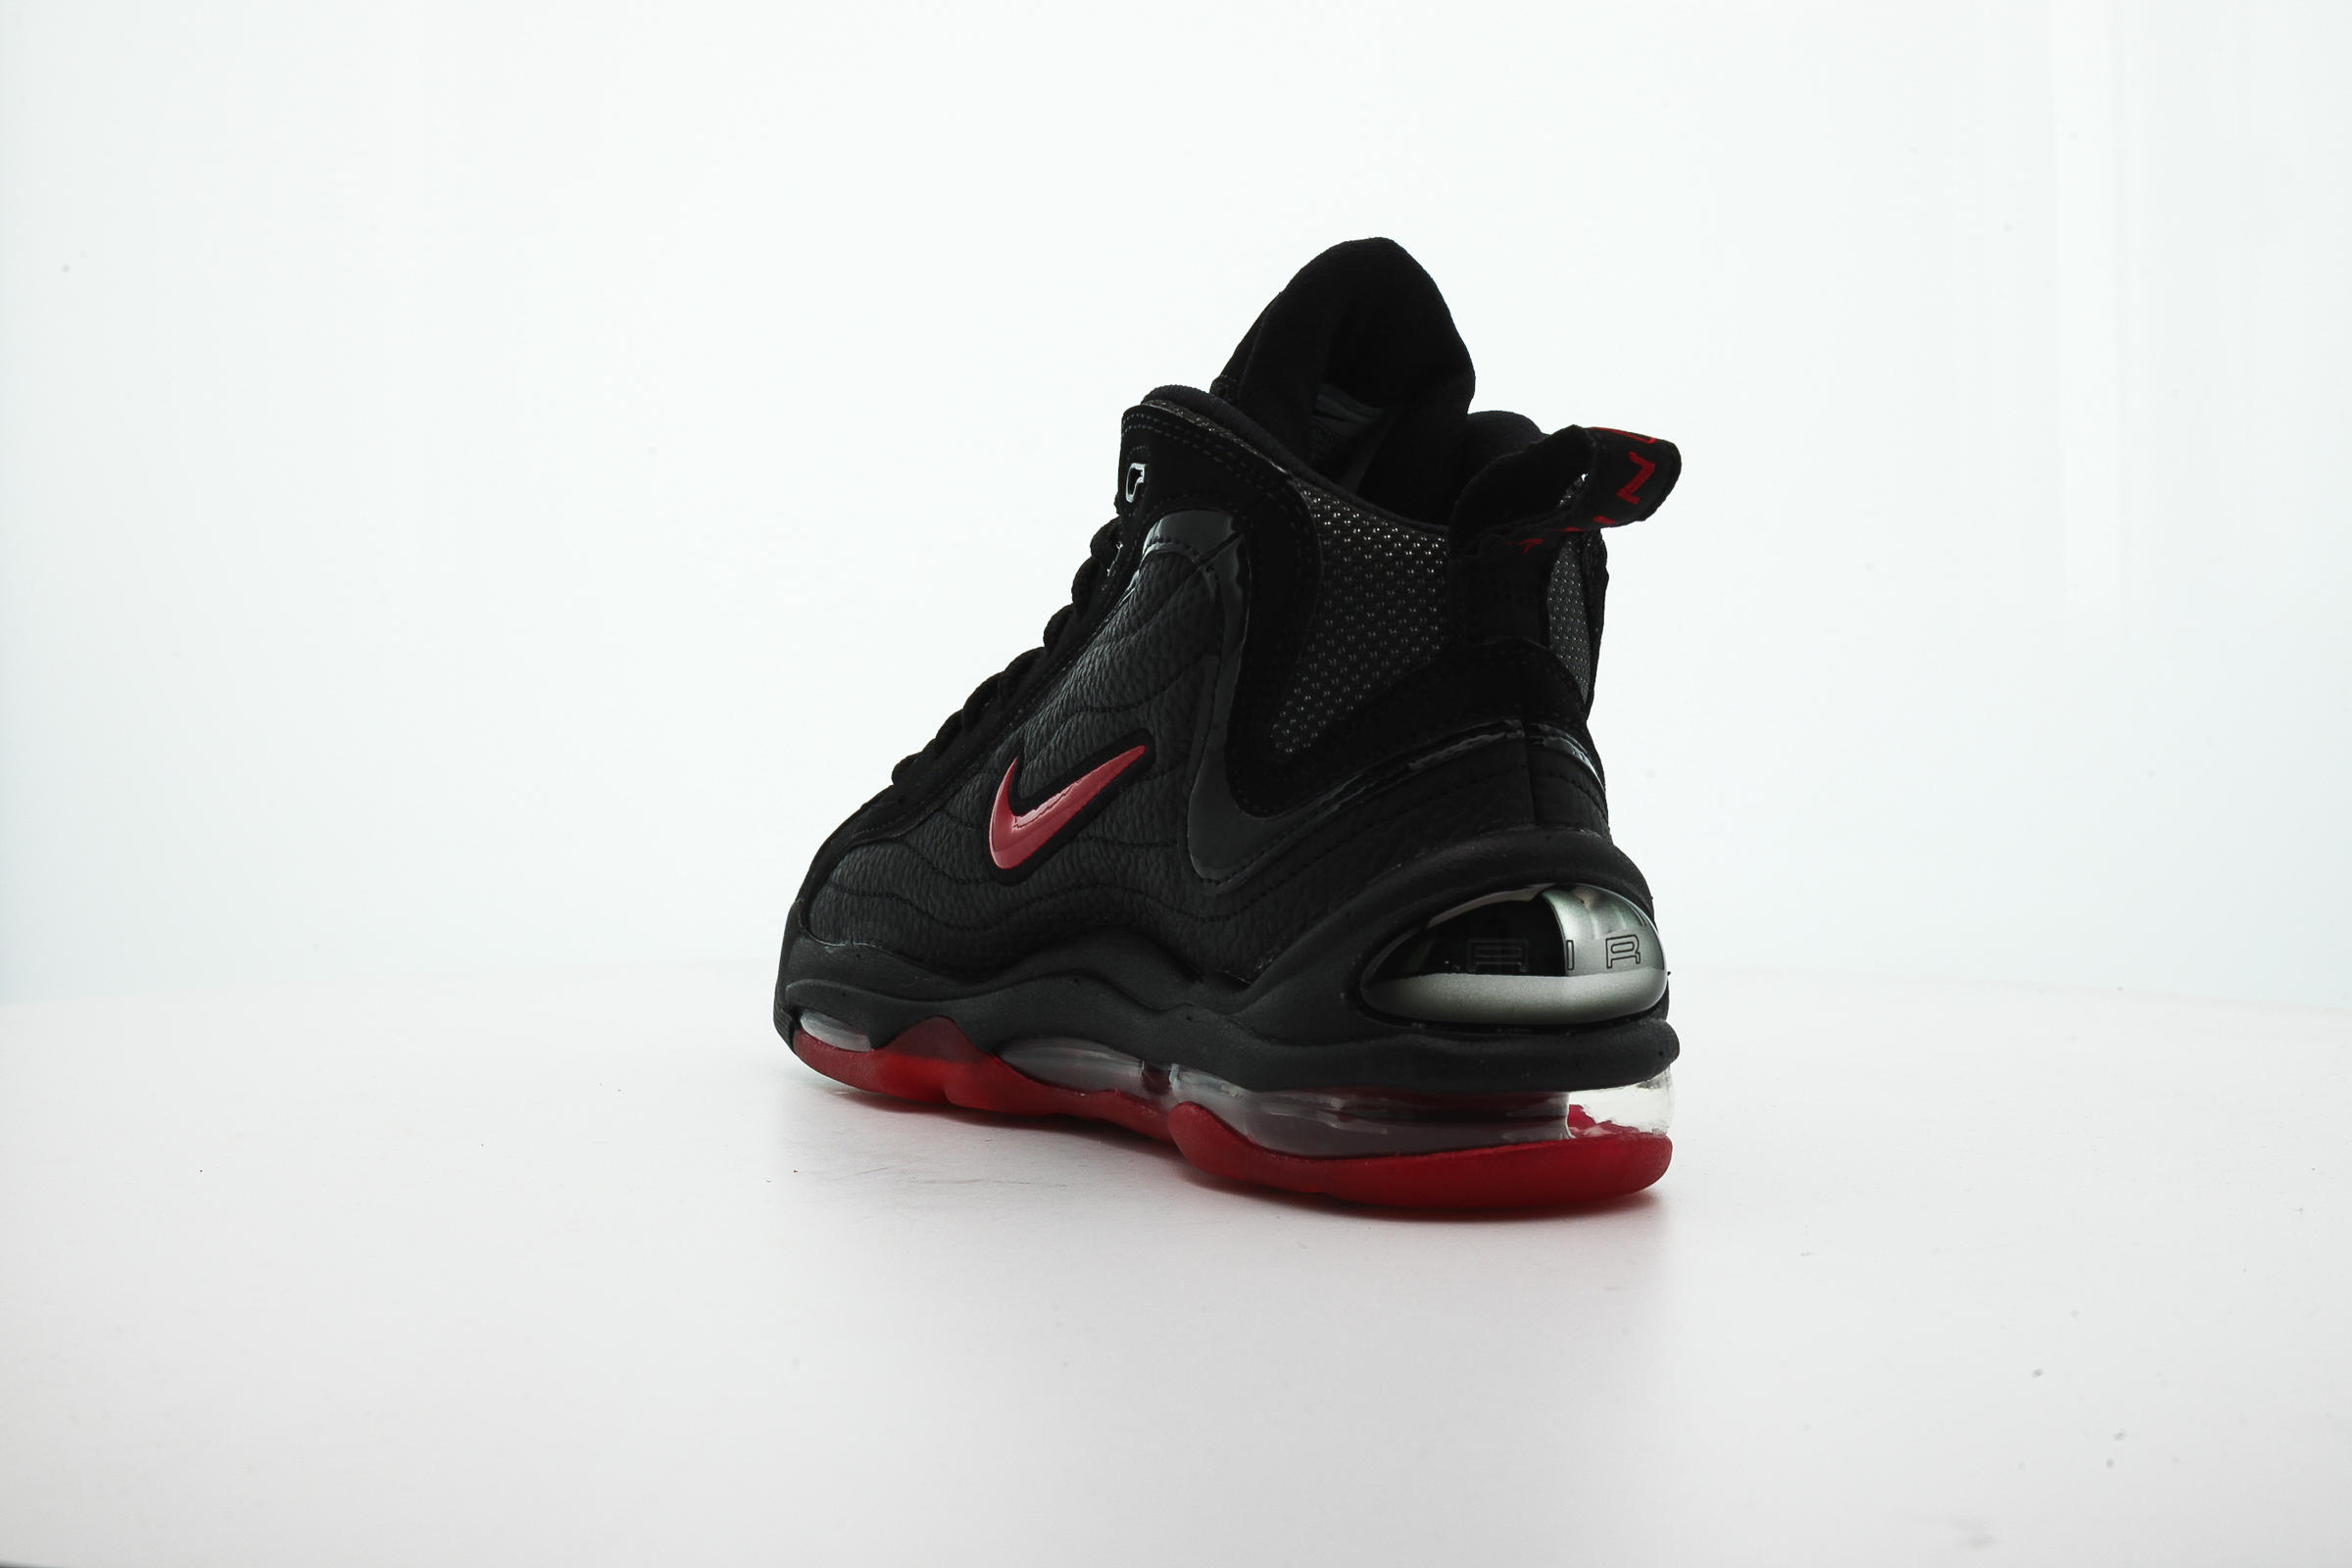 Nike AIR TOTAL MAX UPTEMPO